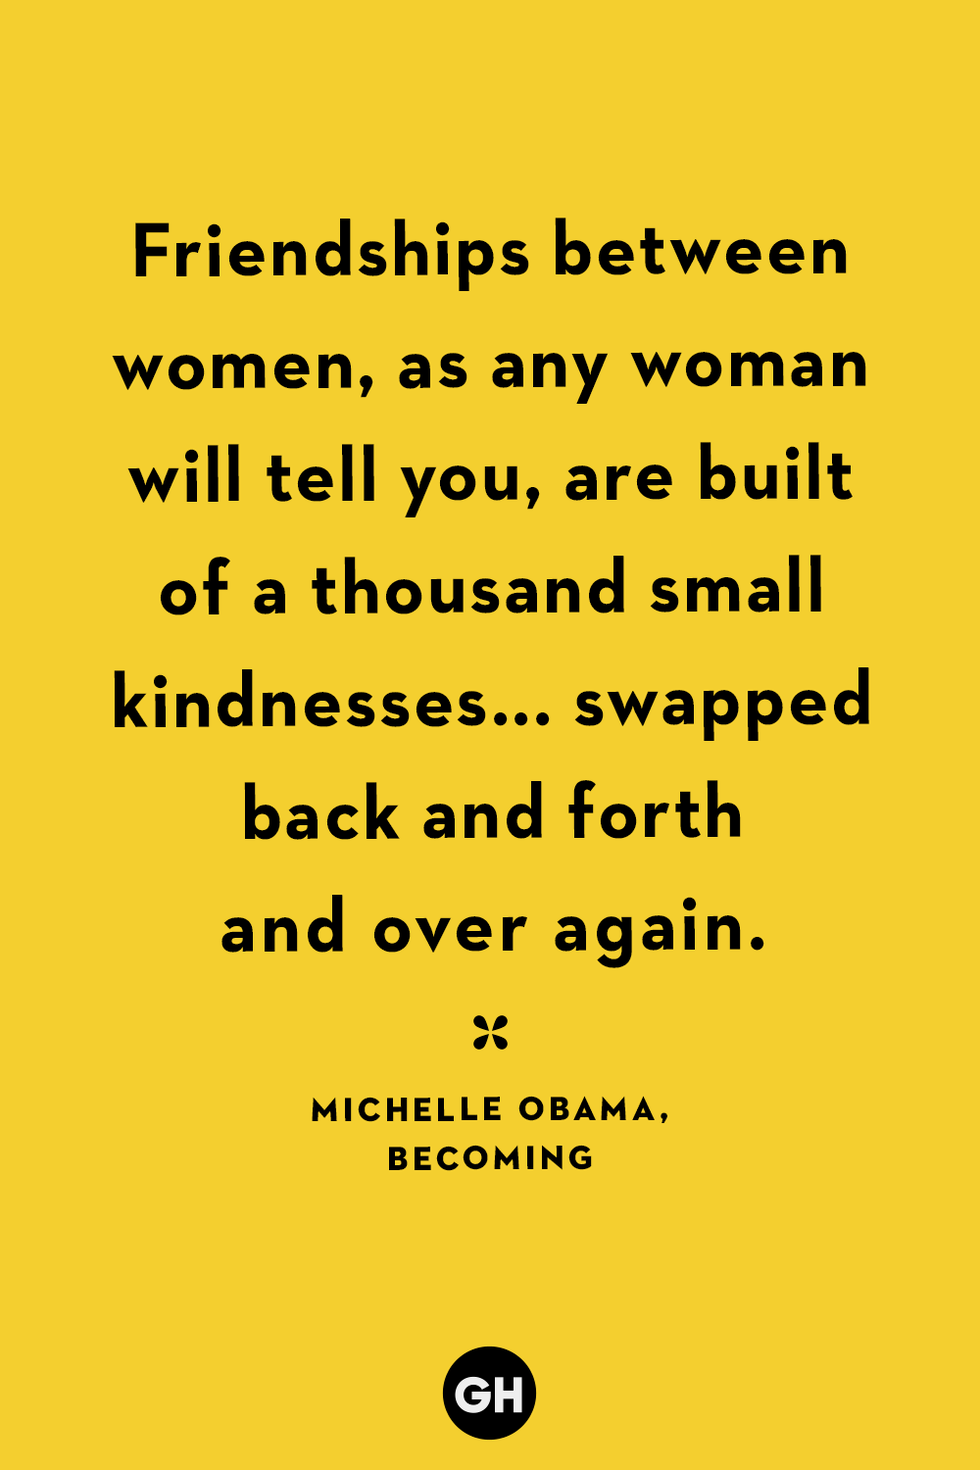 https://hips.hearstapps.com/hmg-prod/images/gh-friendship-quotes-michelle-obama-becoming-64492f48b217e.png?crop=1xw:1xh;center,top&resize=980:*